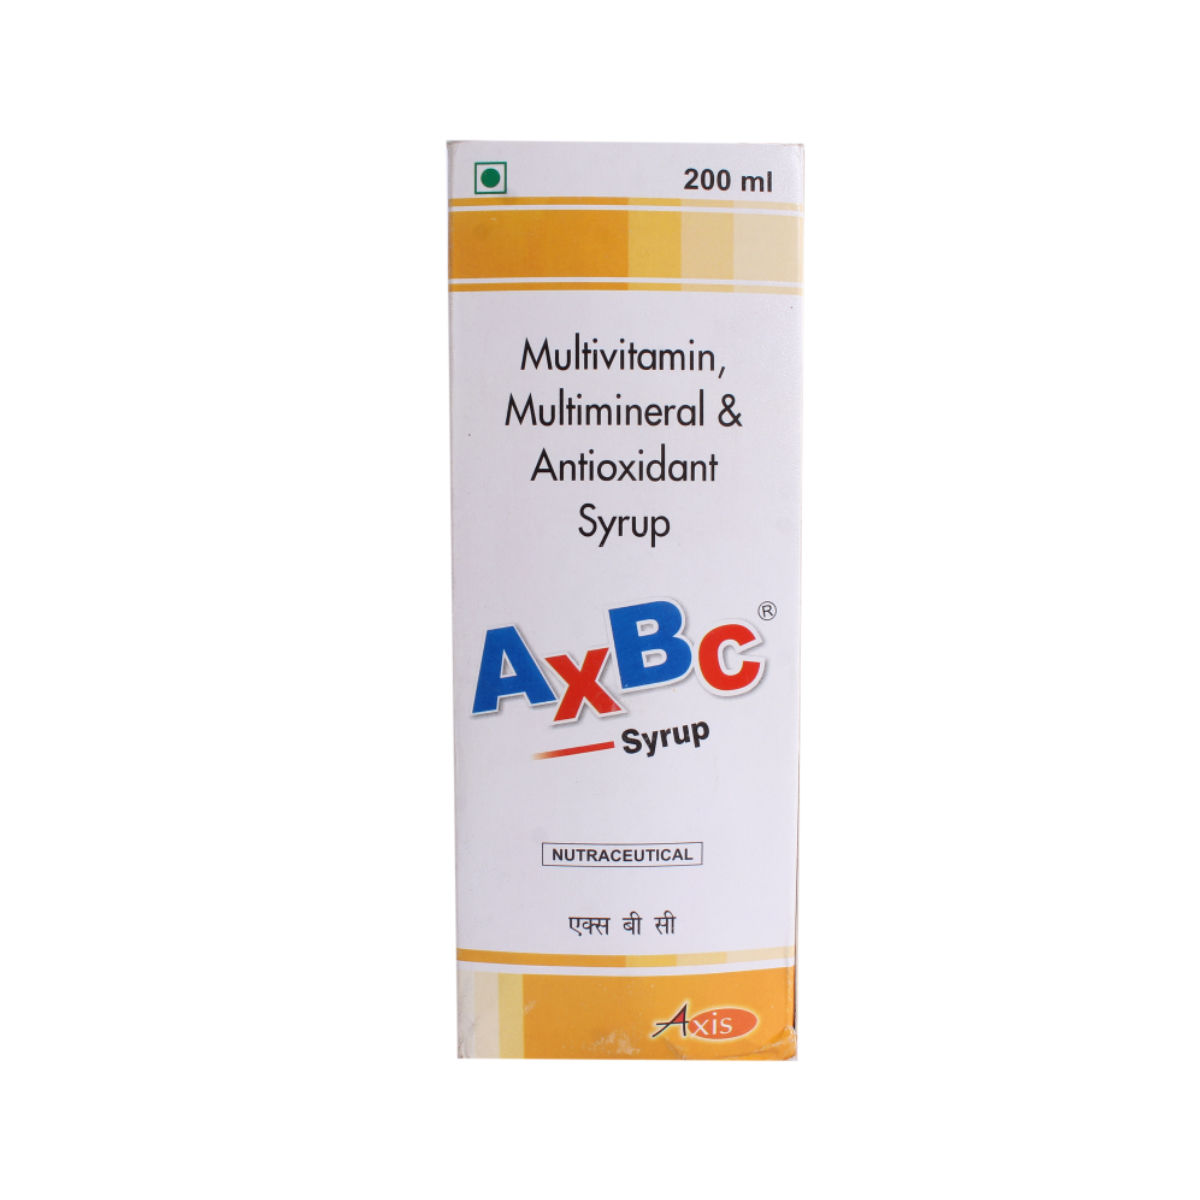 Axbc Syrup 200 ml, Pack of 1 